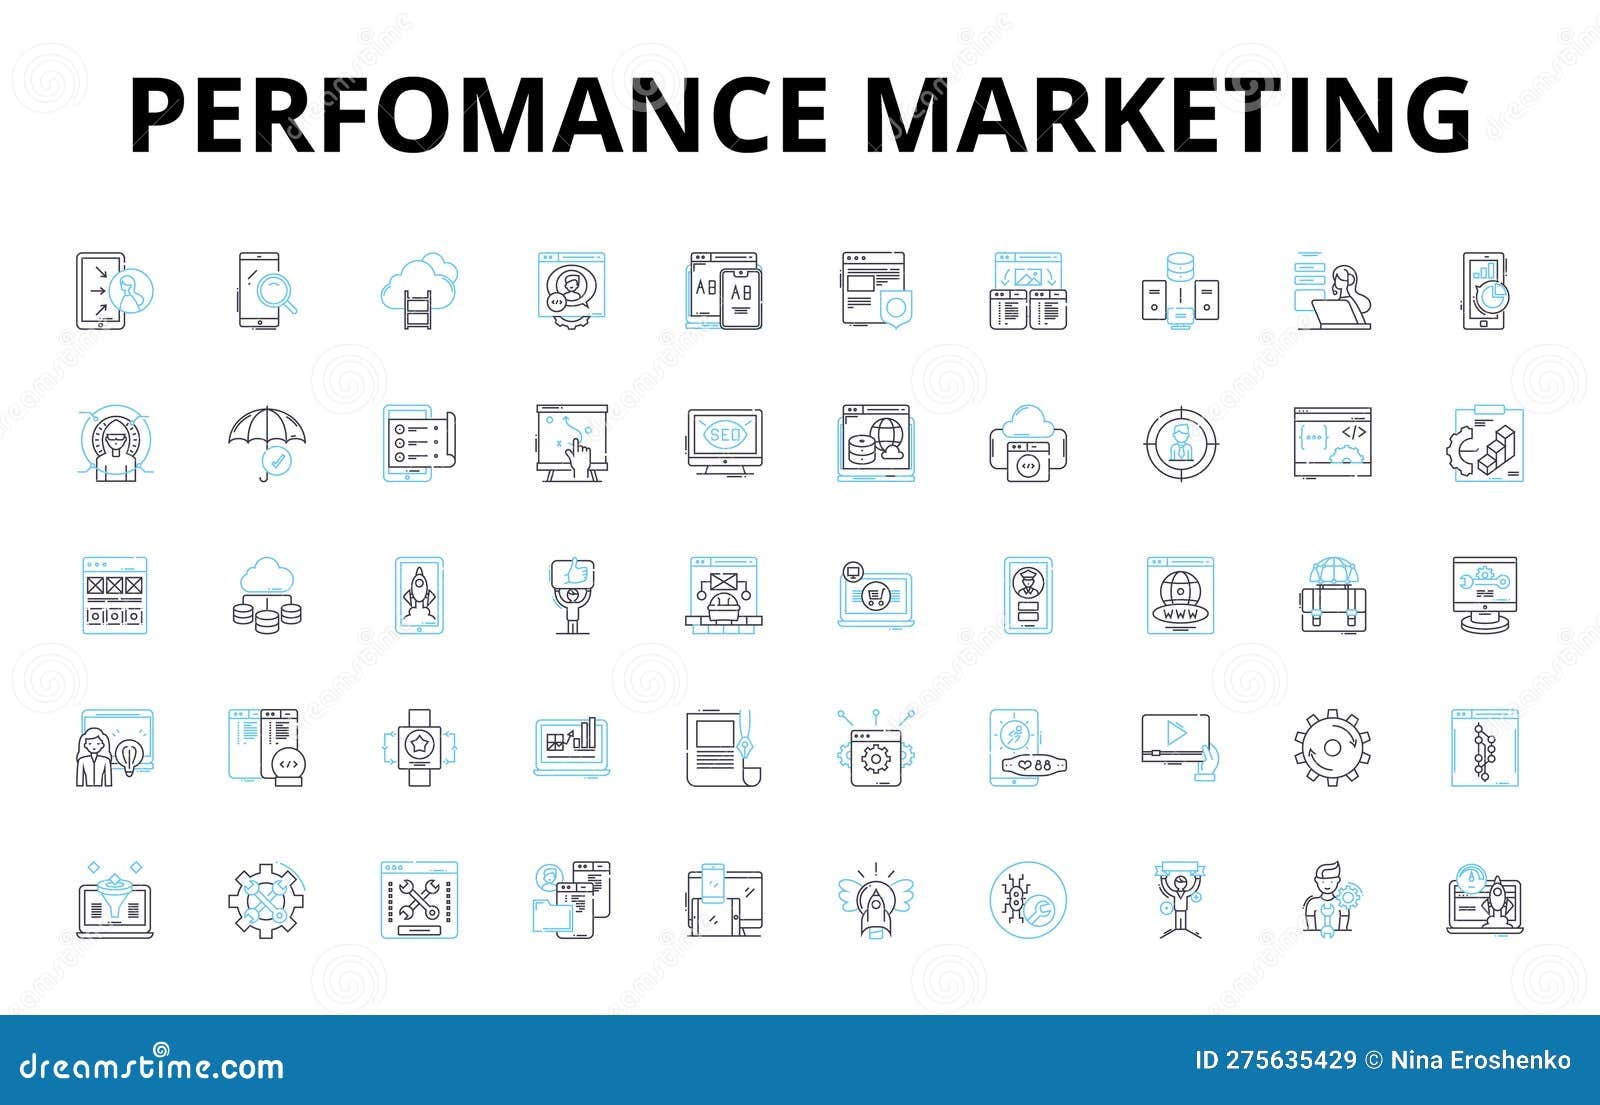 perfomance marketing linear icons set. conversion, clickthrough, roi, impressions, engagement, analytics, affiliates